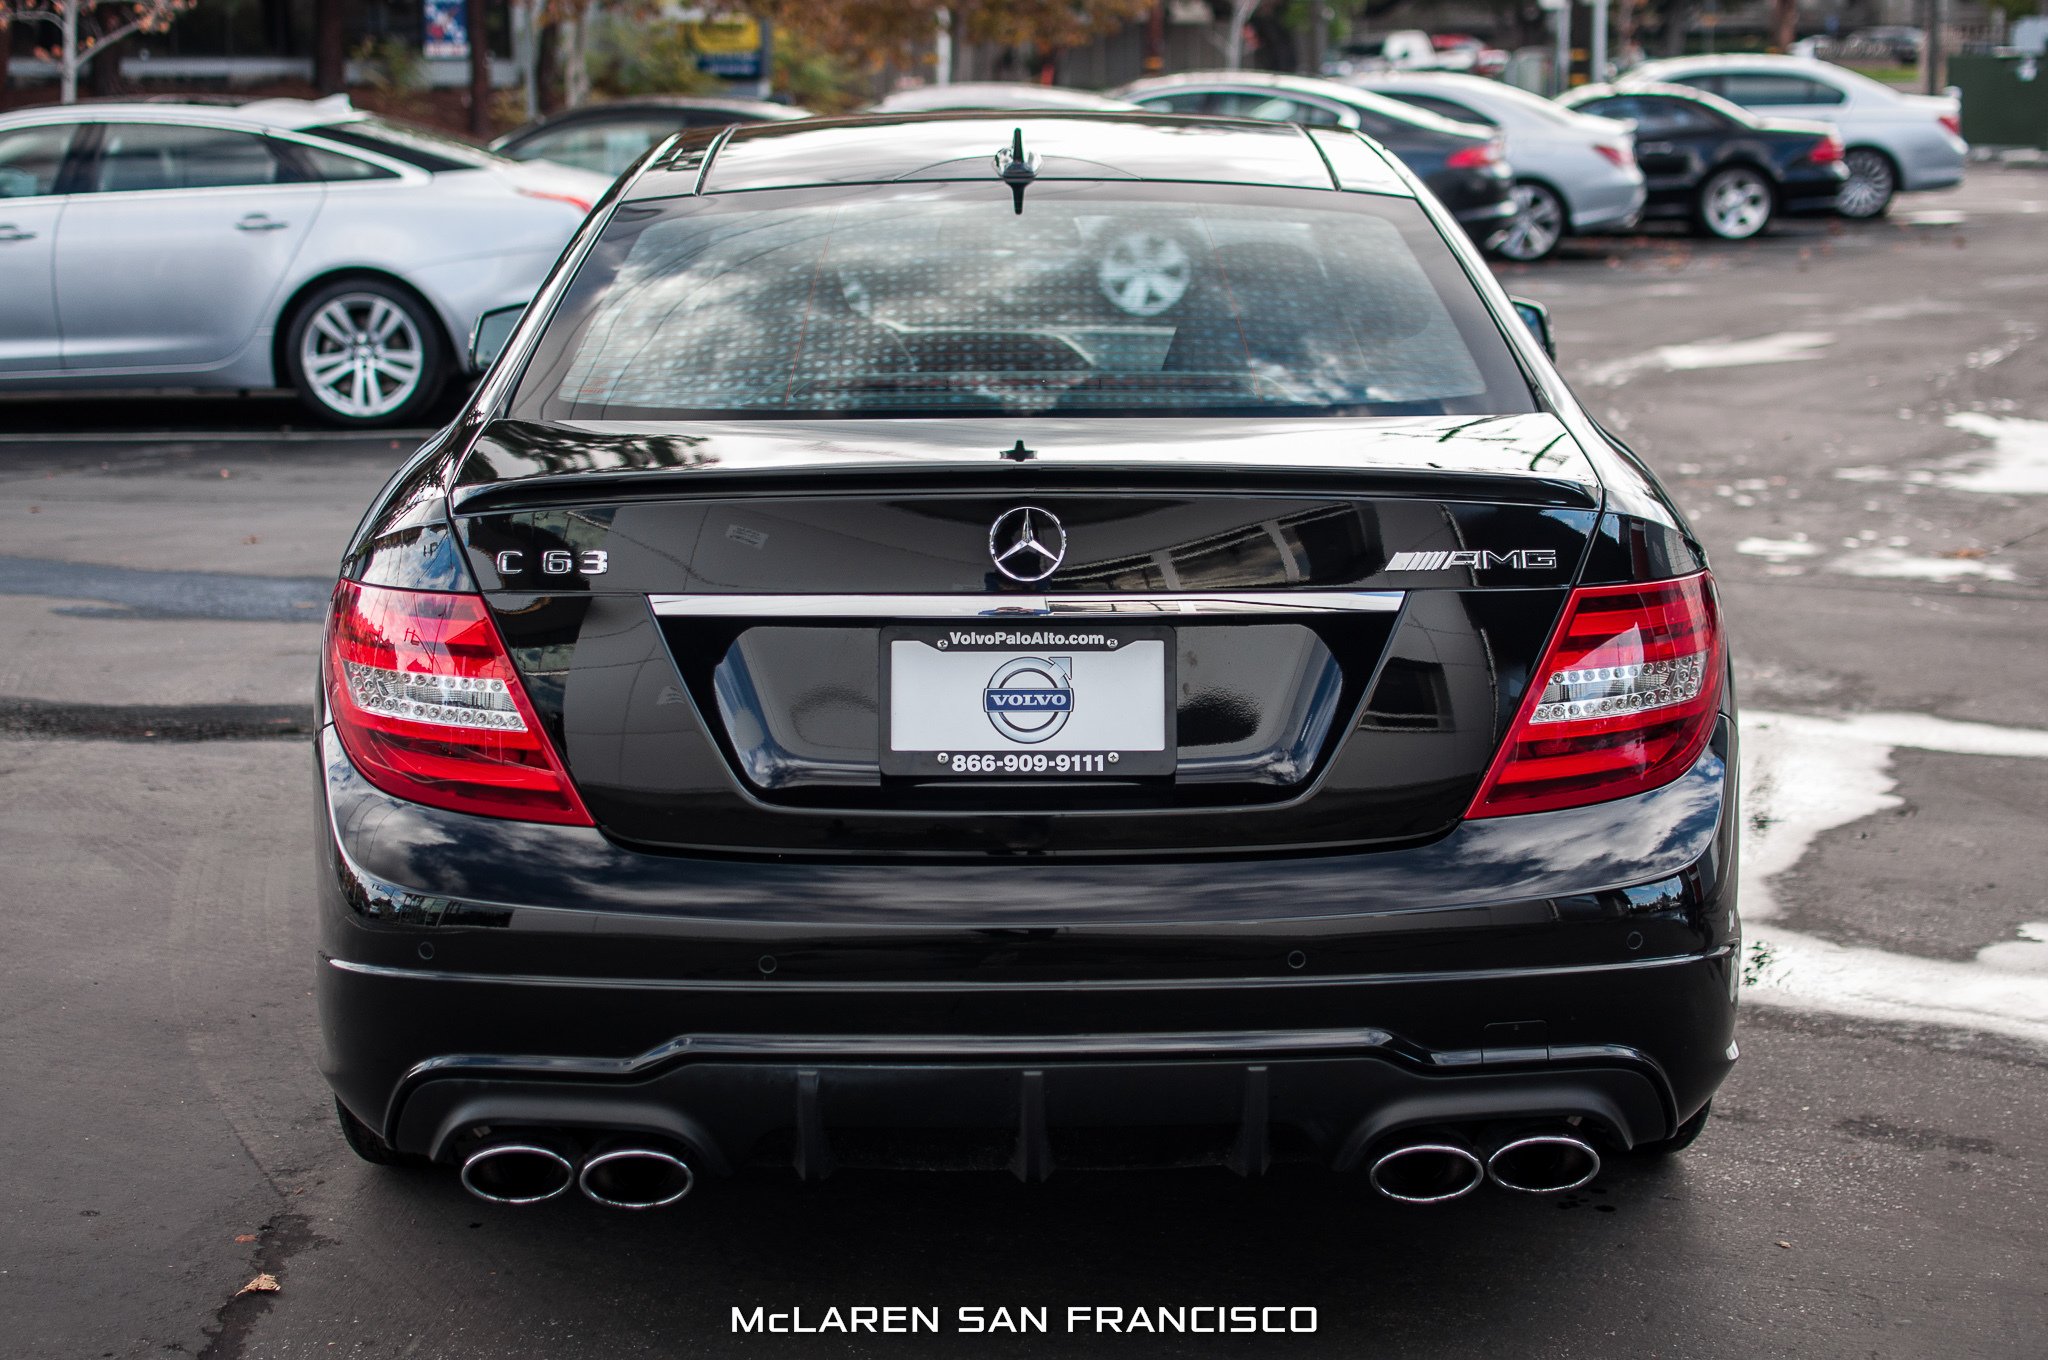 2014, Mercedes, Benz, C63, Amg, Edition, 507, Cars, Coupe